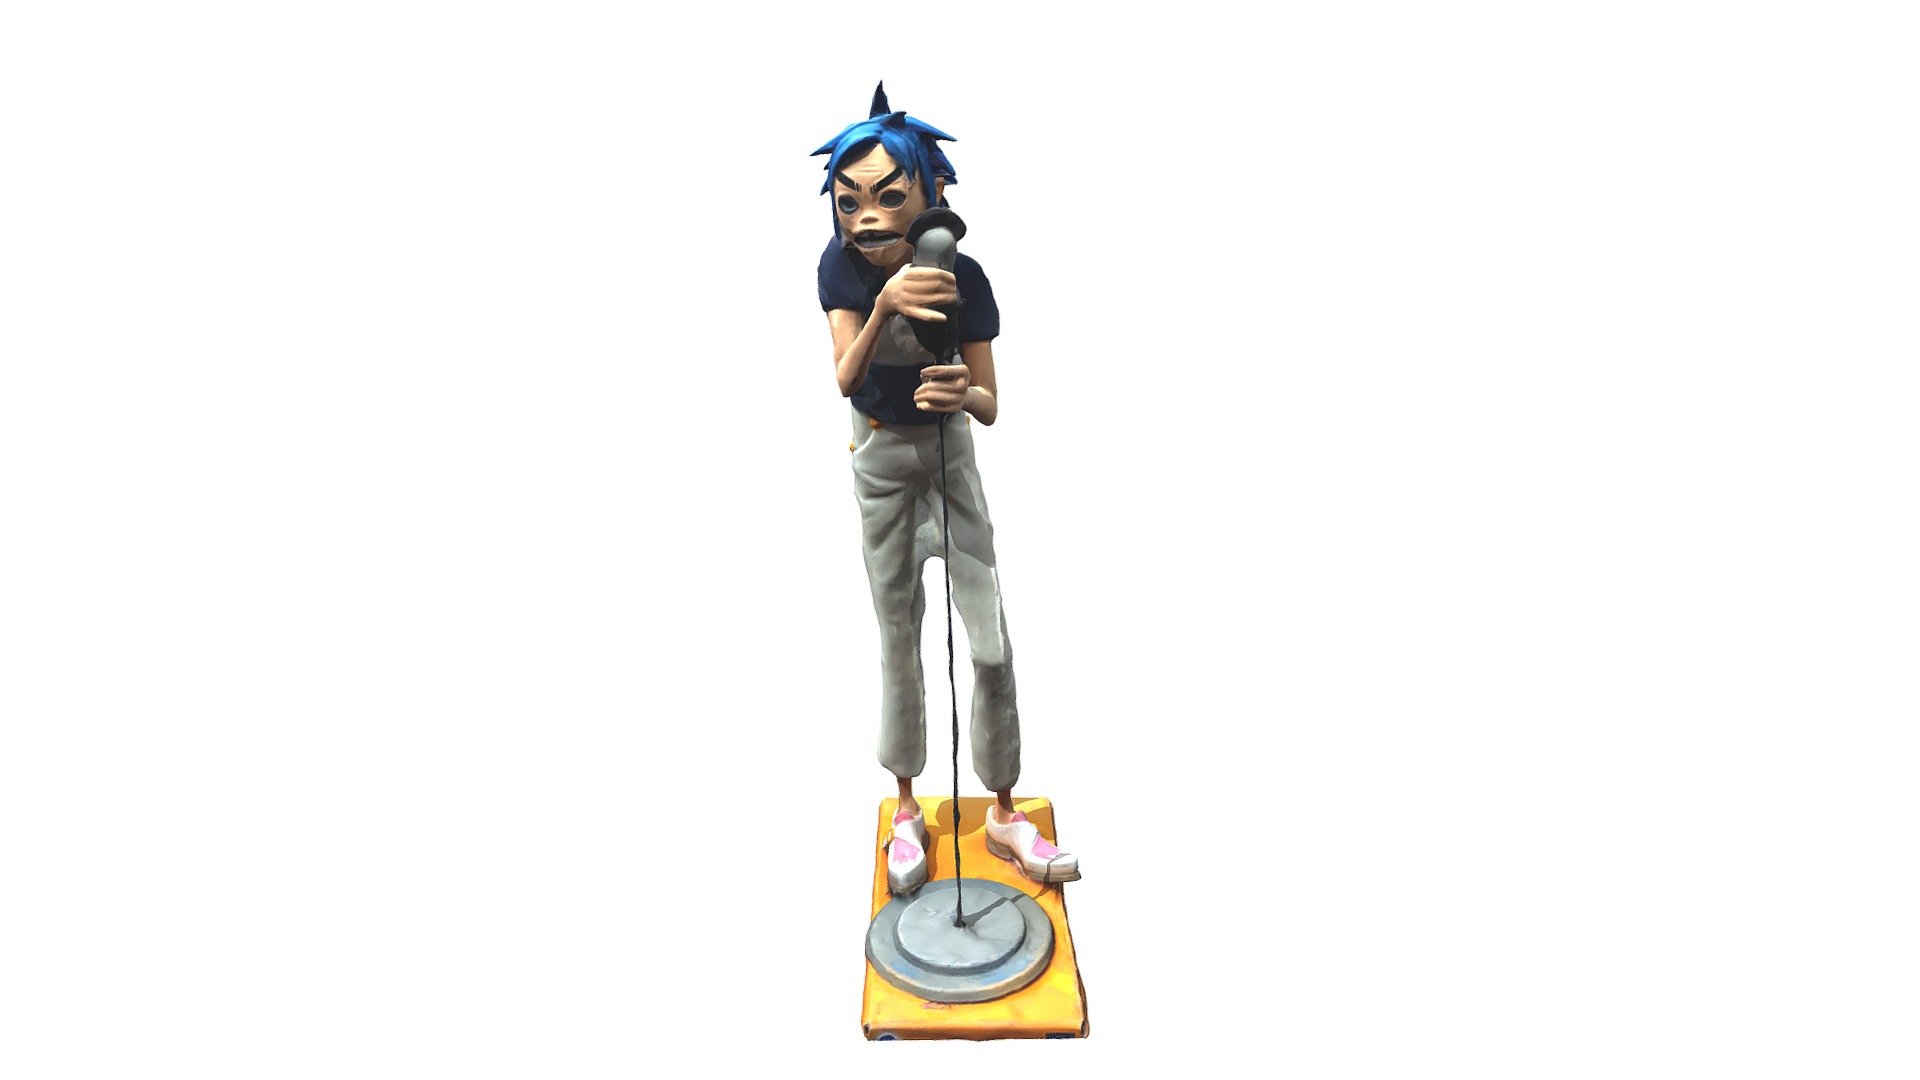 scan made in Paris - Gorillaz sculpture - Download Free 3D model by Leam (@leamlld) 3d model